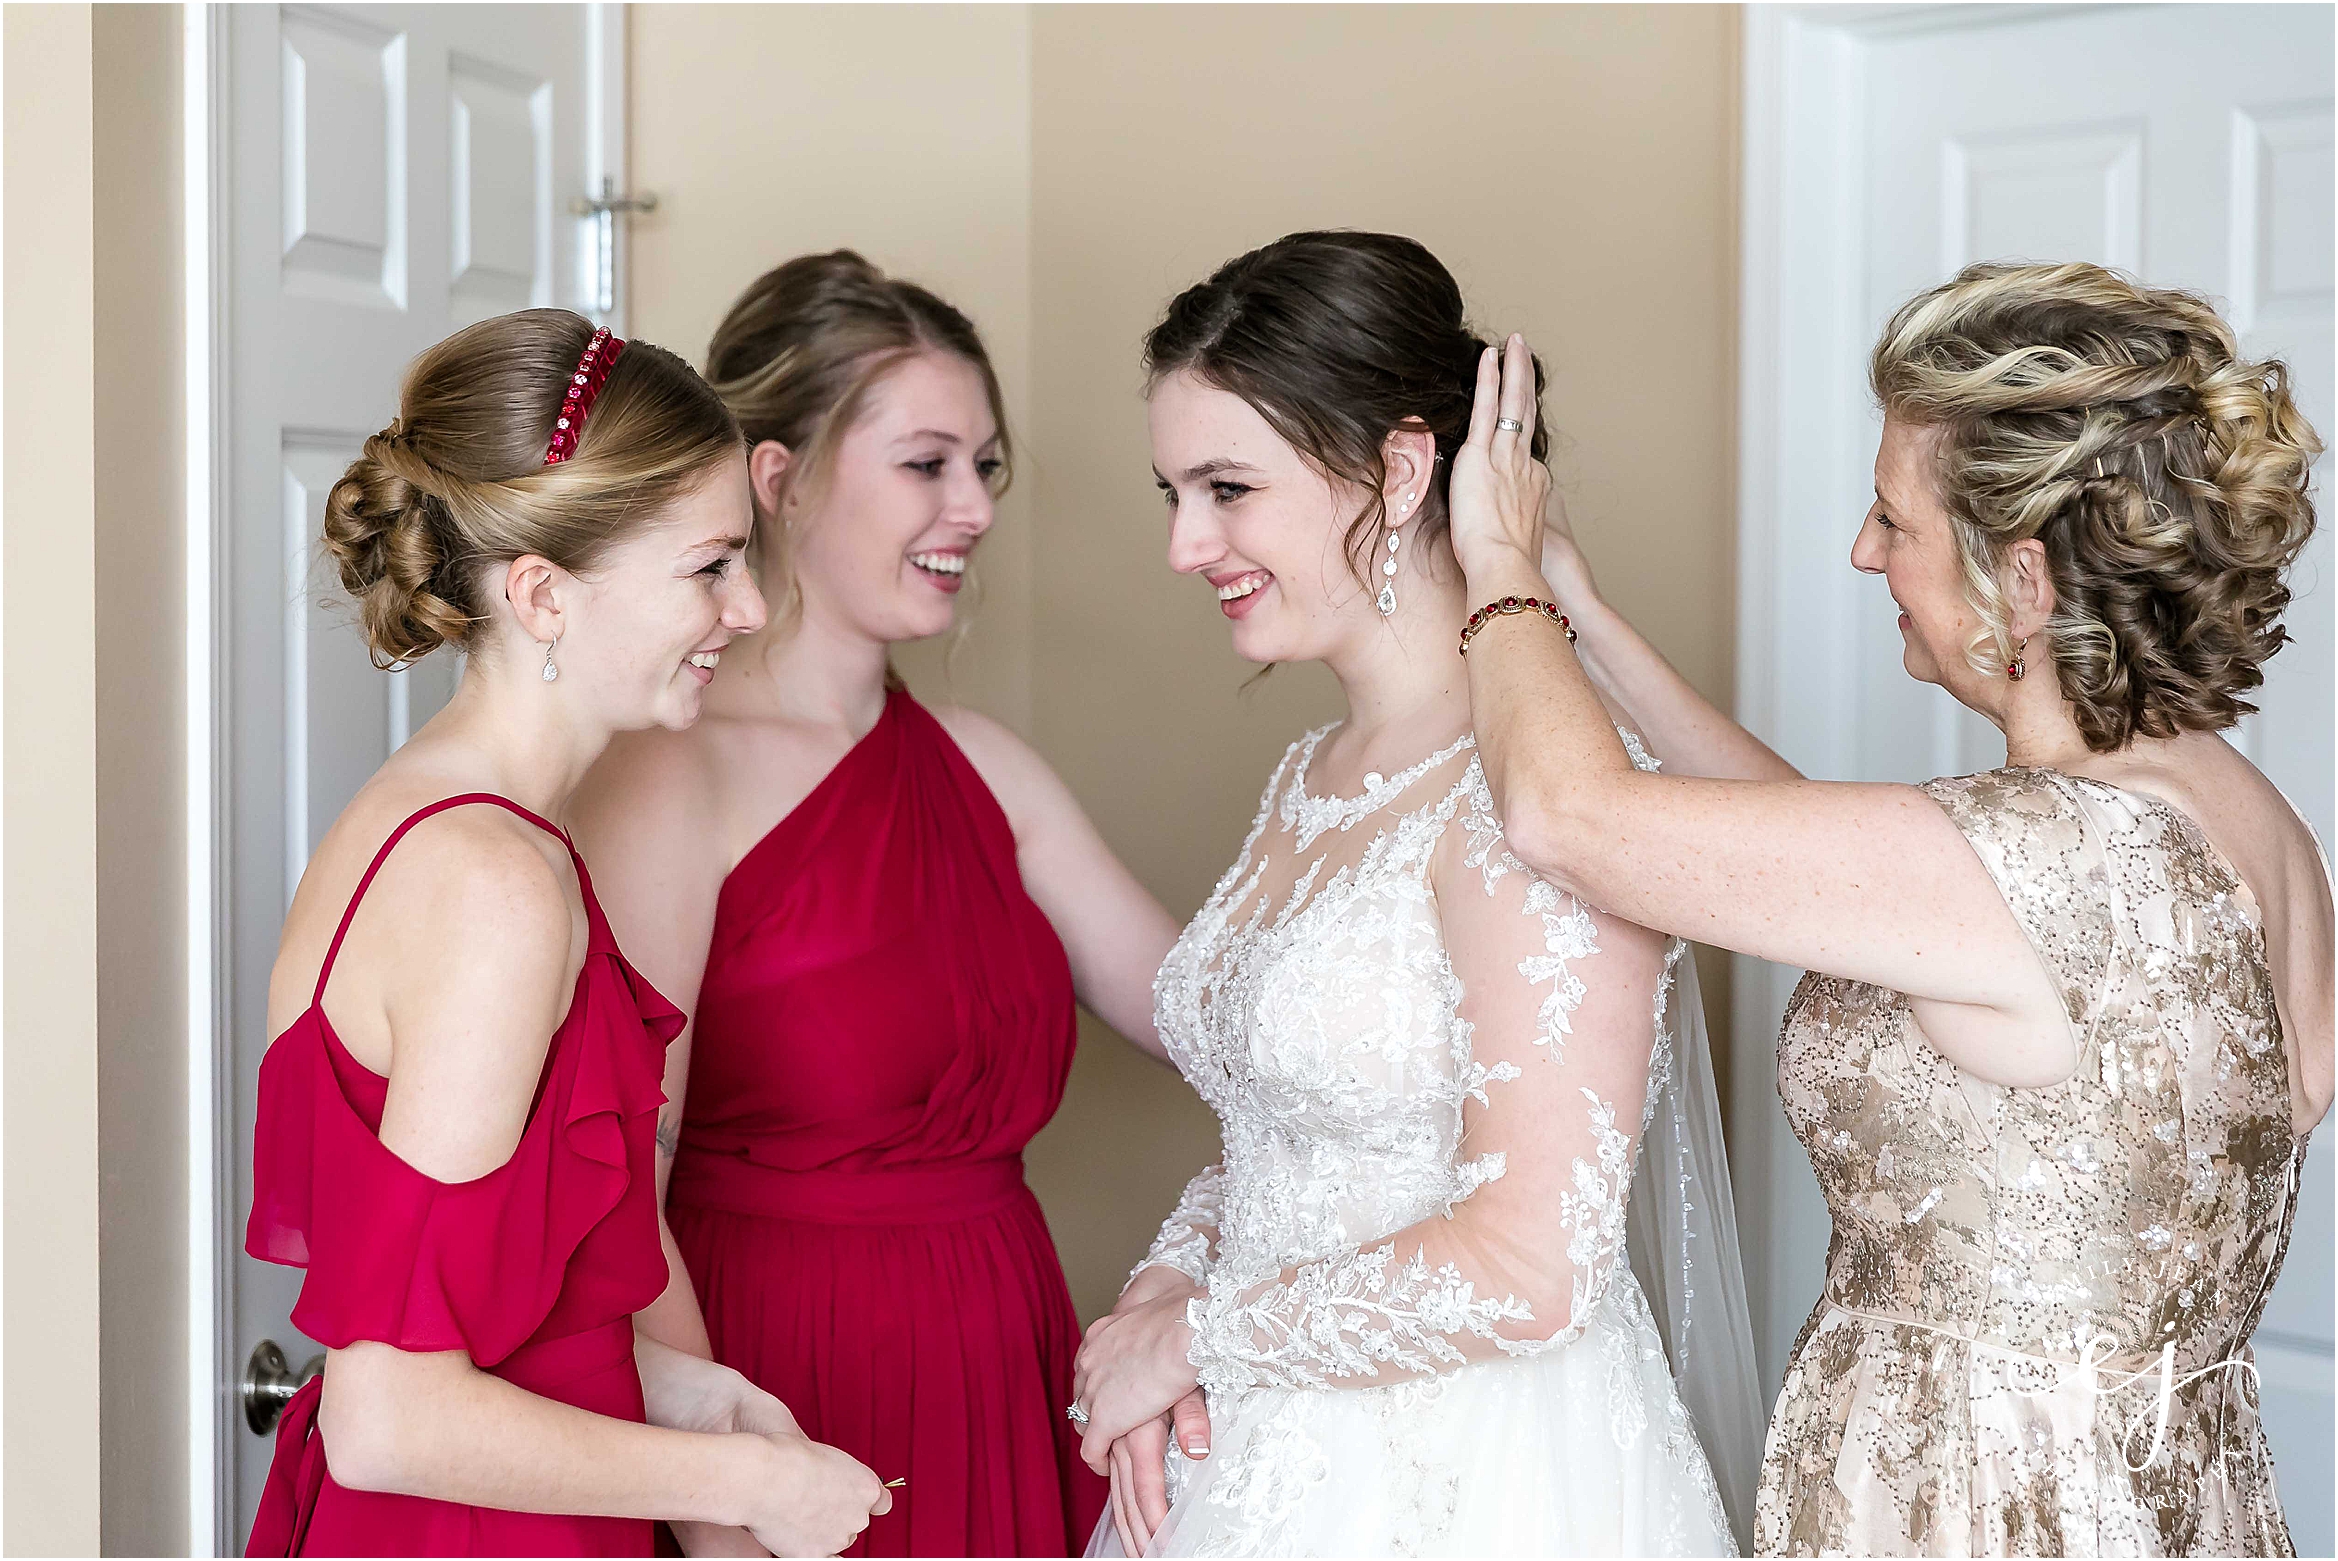 bridesmaids sisters and mom helping bride get dressed